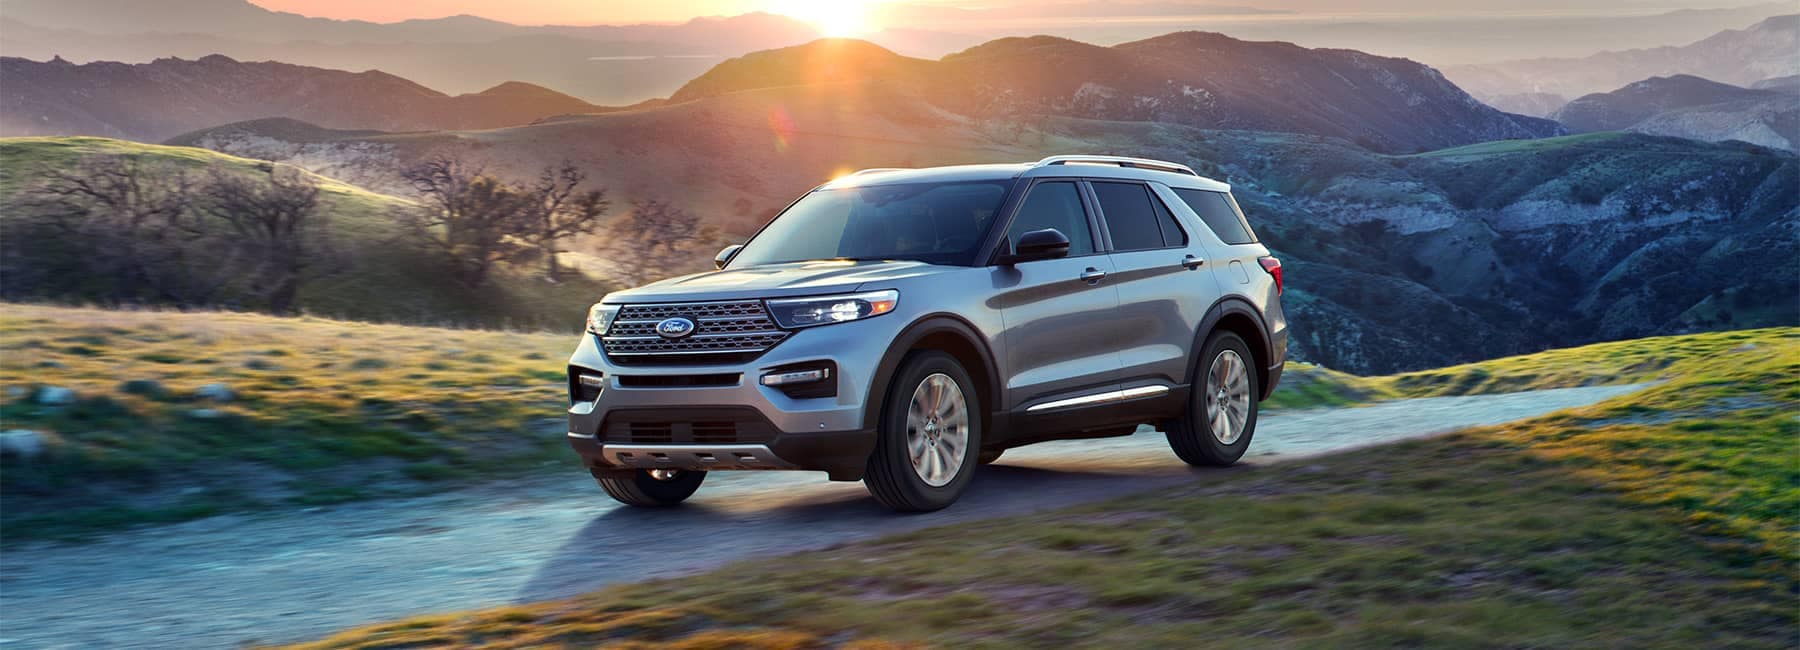 2022 Ford Explorer in front of a mountain sunset